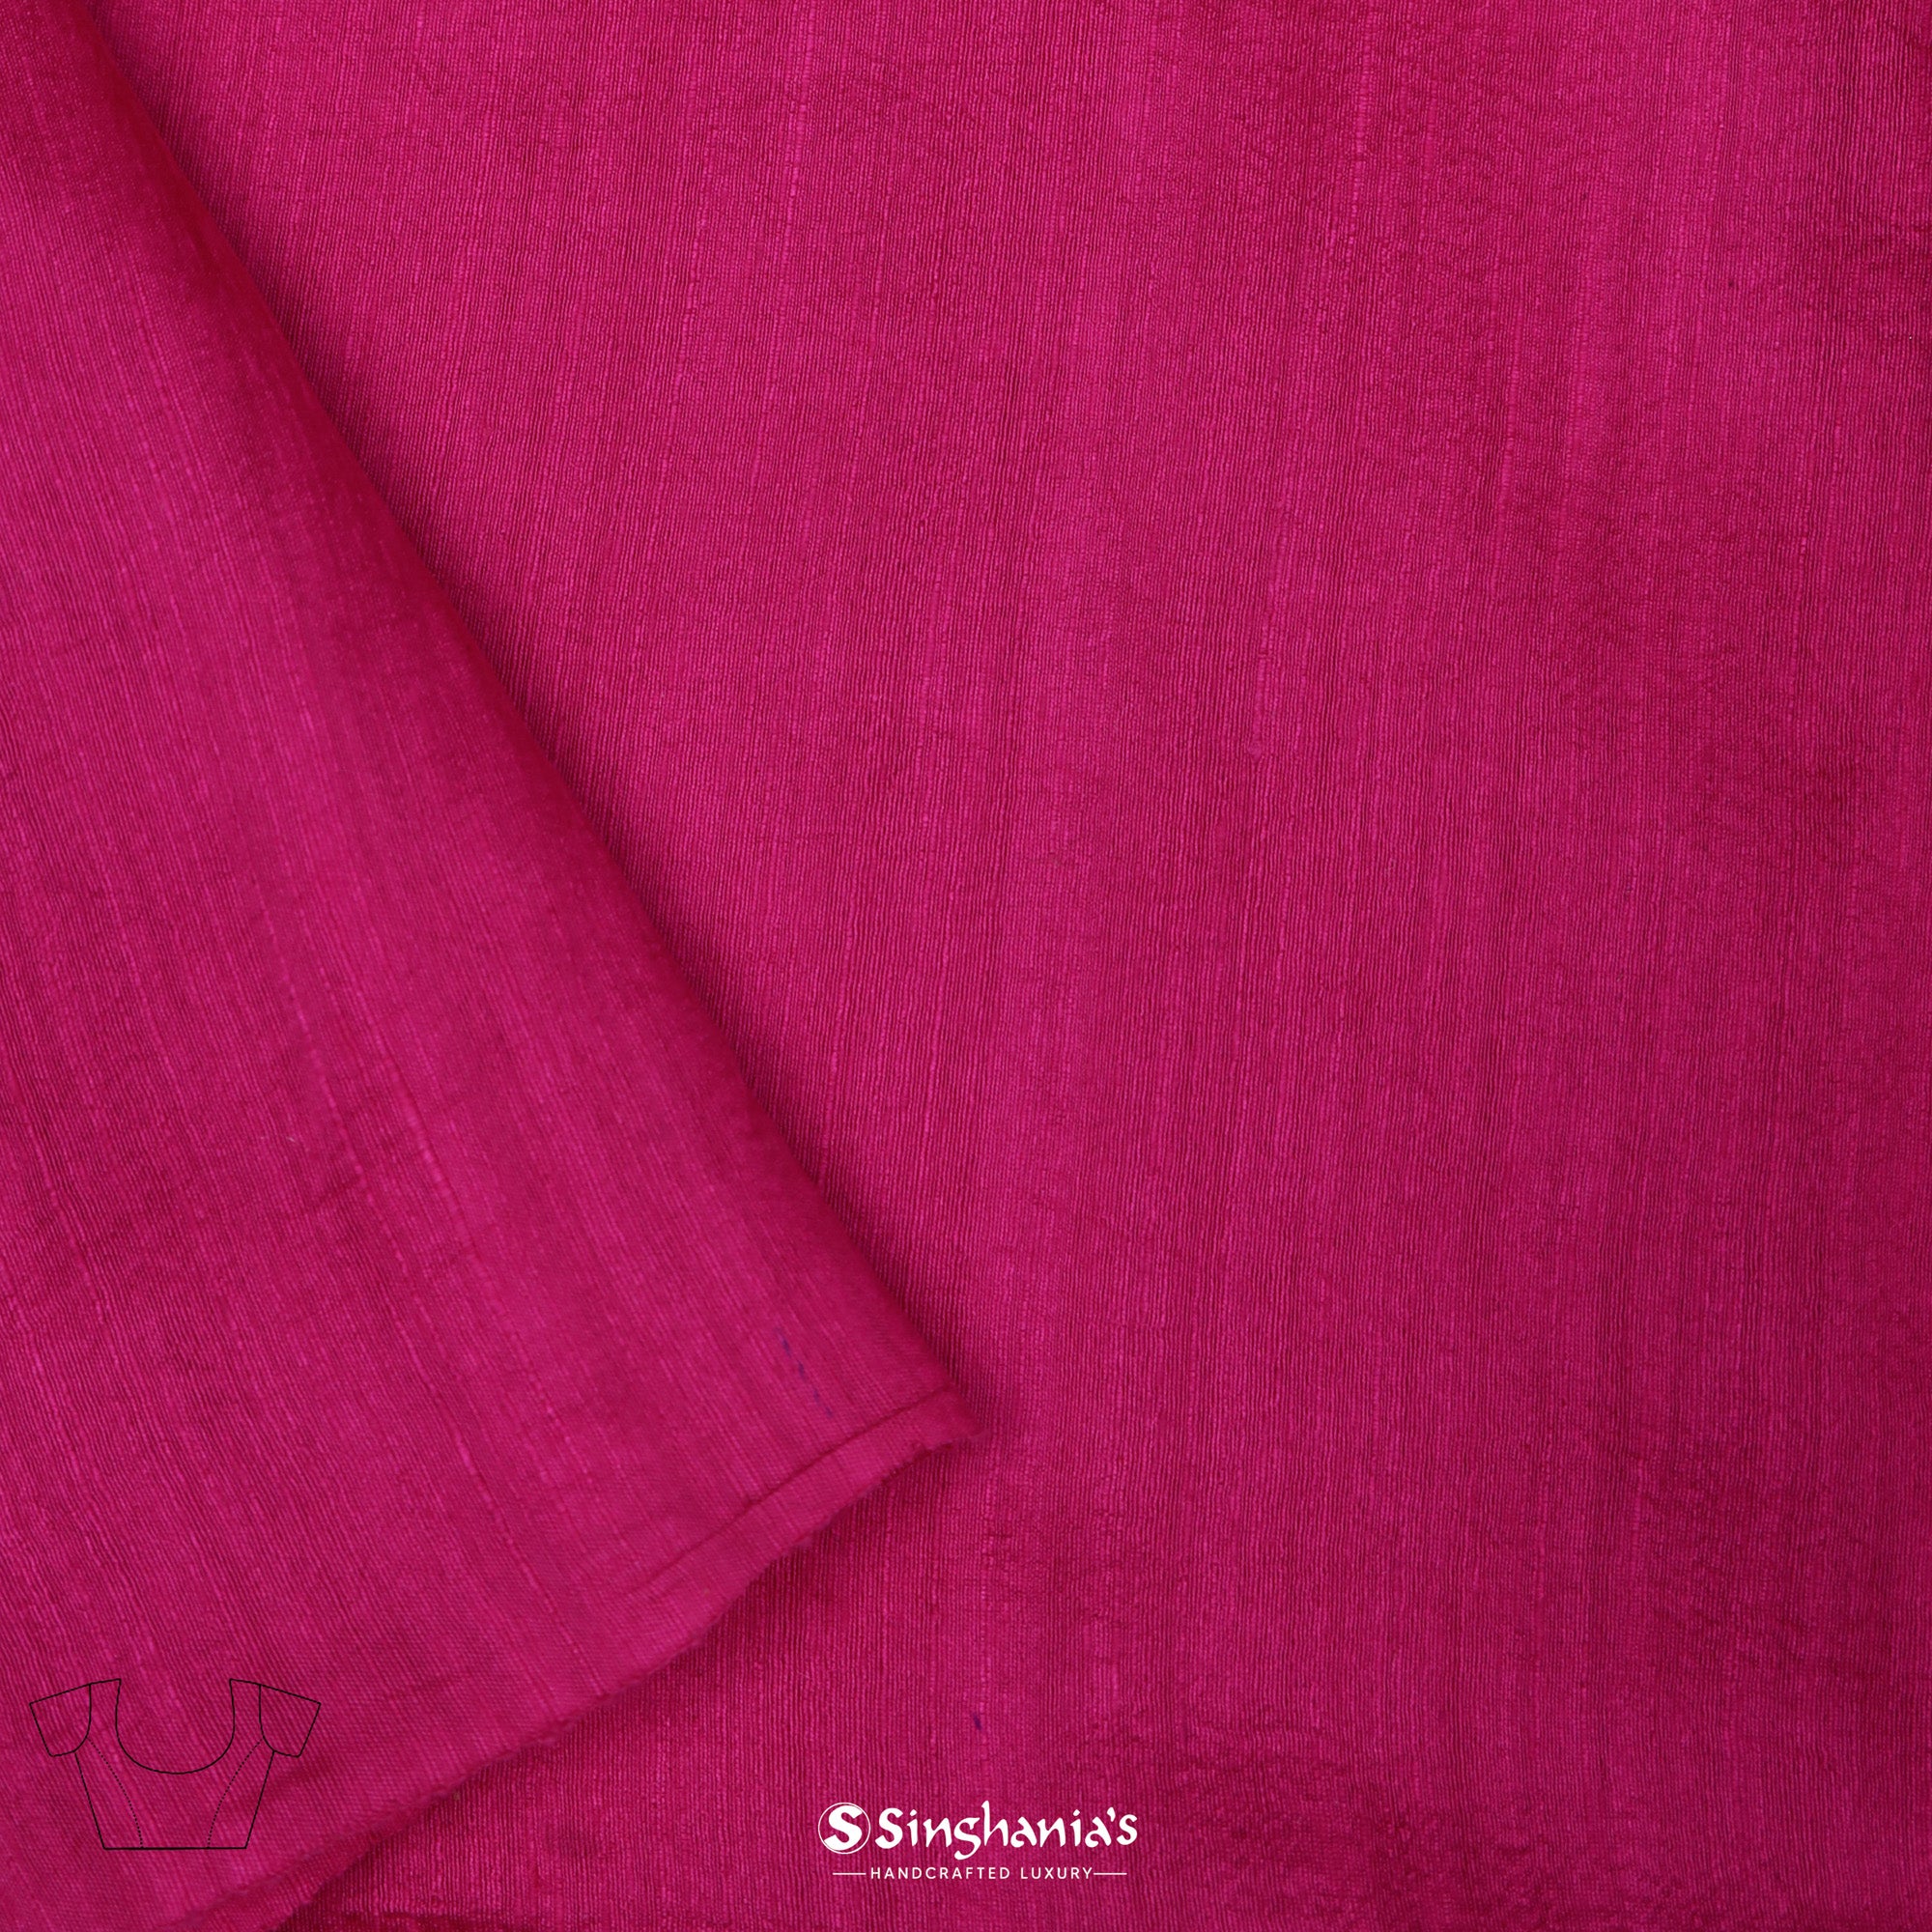 Barbie Pink Matka Saree With Floral Weaving